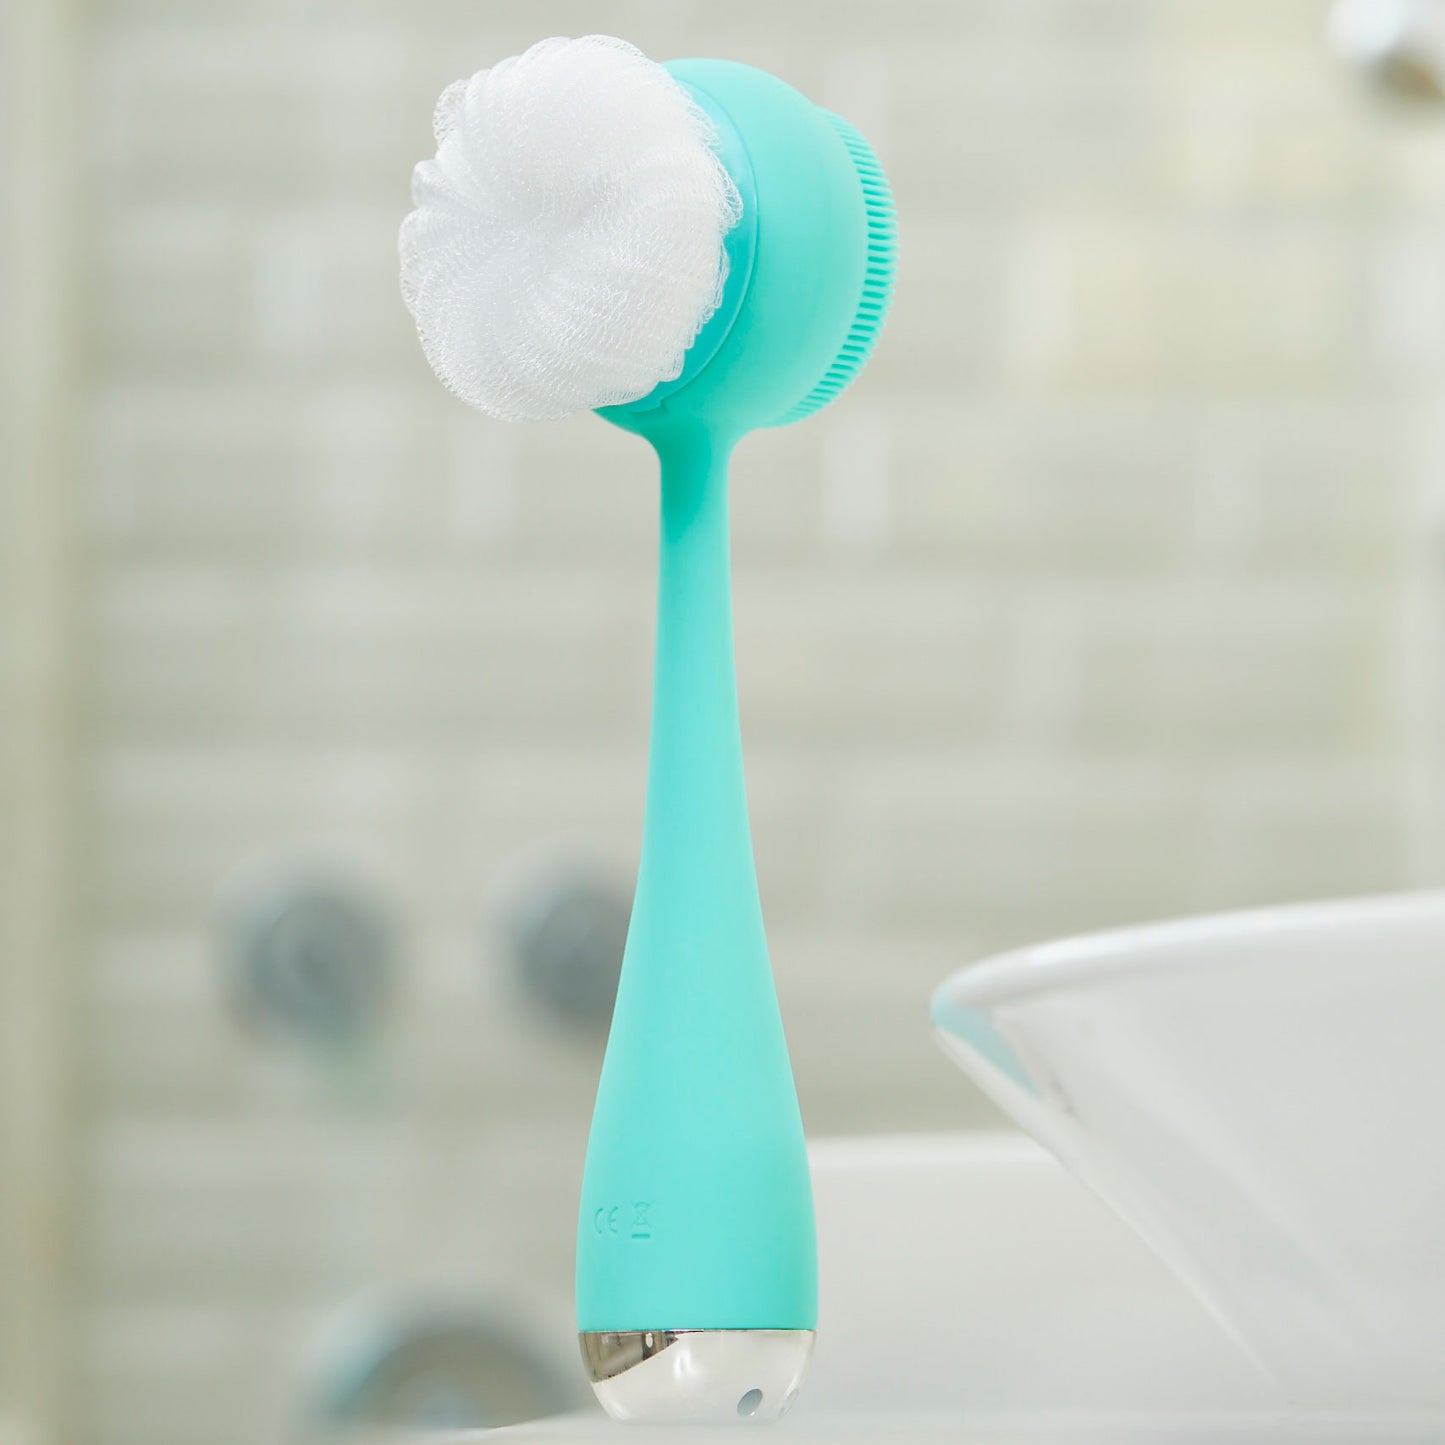 4003-Teall?PMD Clean Body in teal in bathroom showing loofah attachment